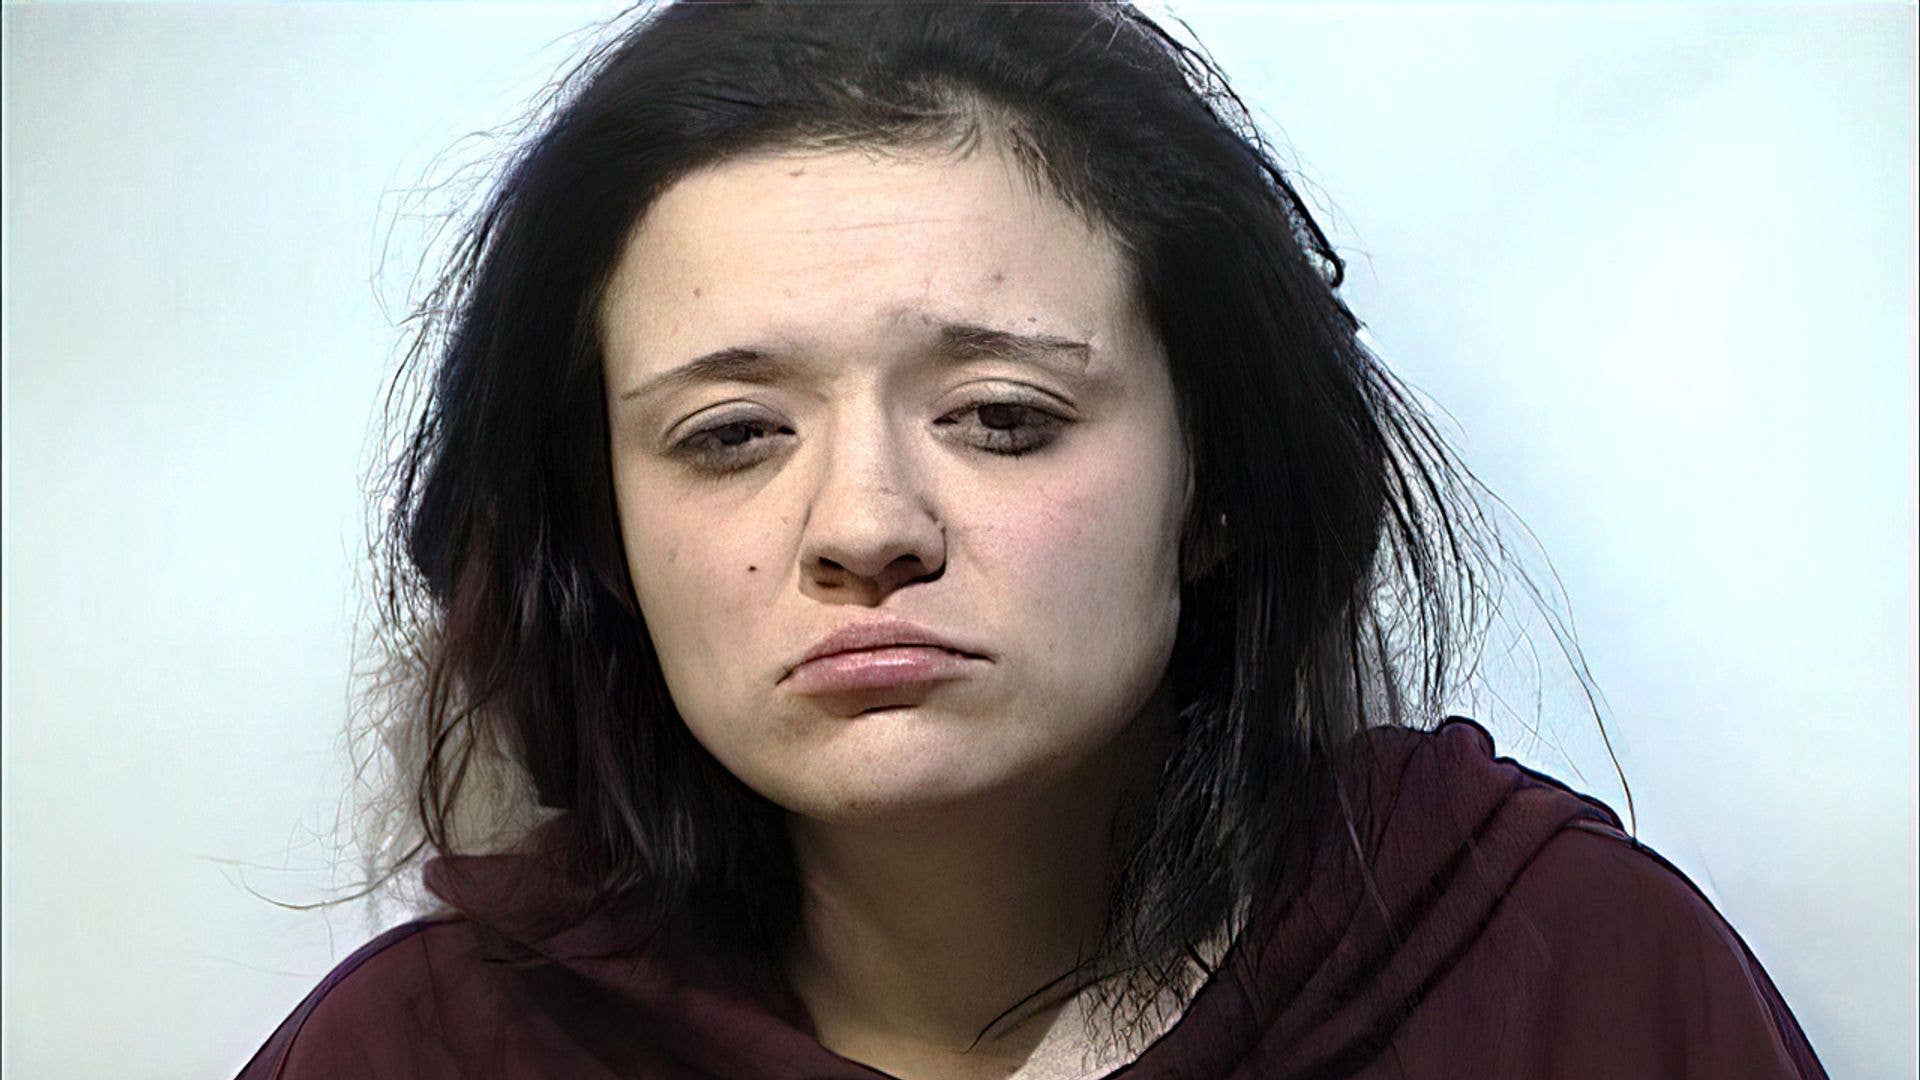 mugshot of Shaylynn Curtis who is being charged with murder of five-month-old baby